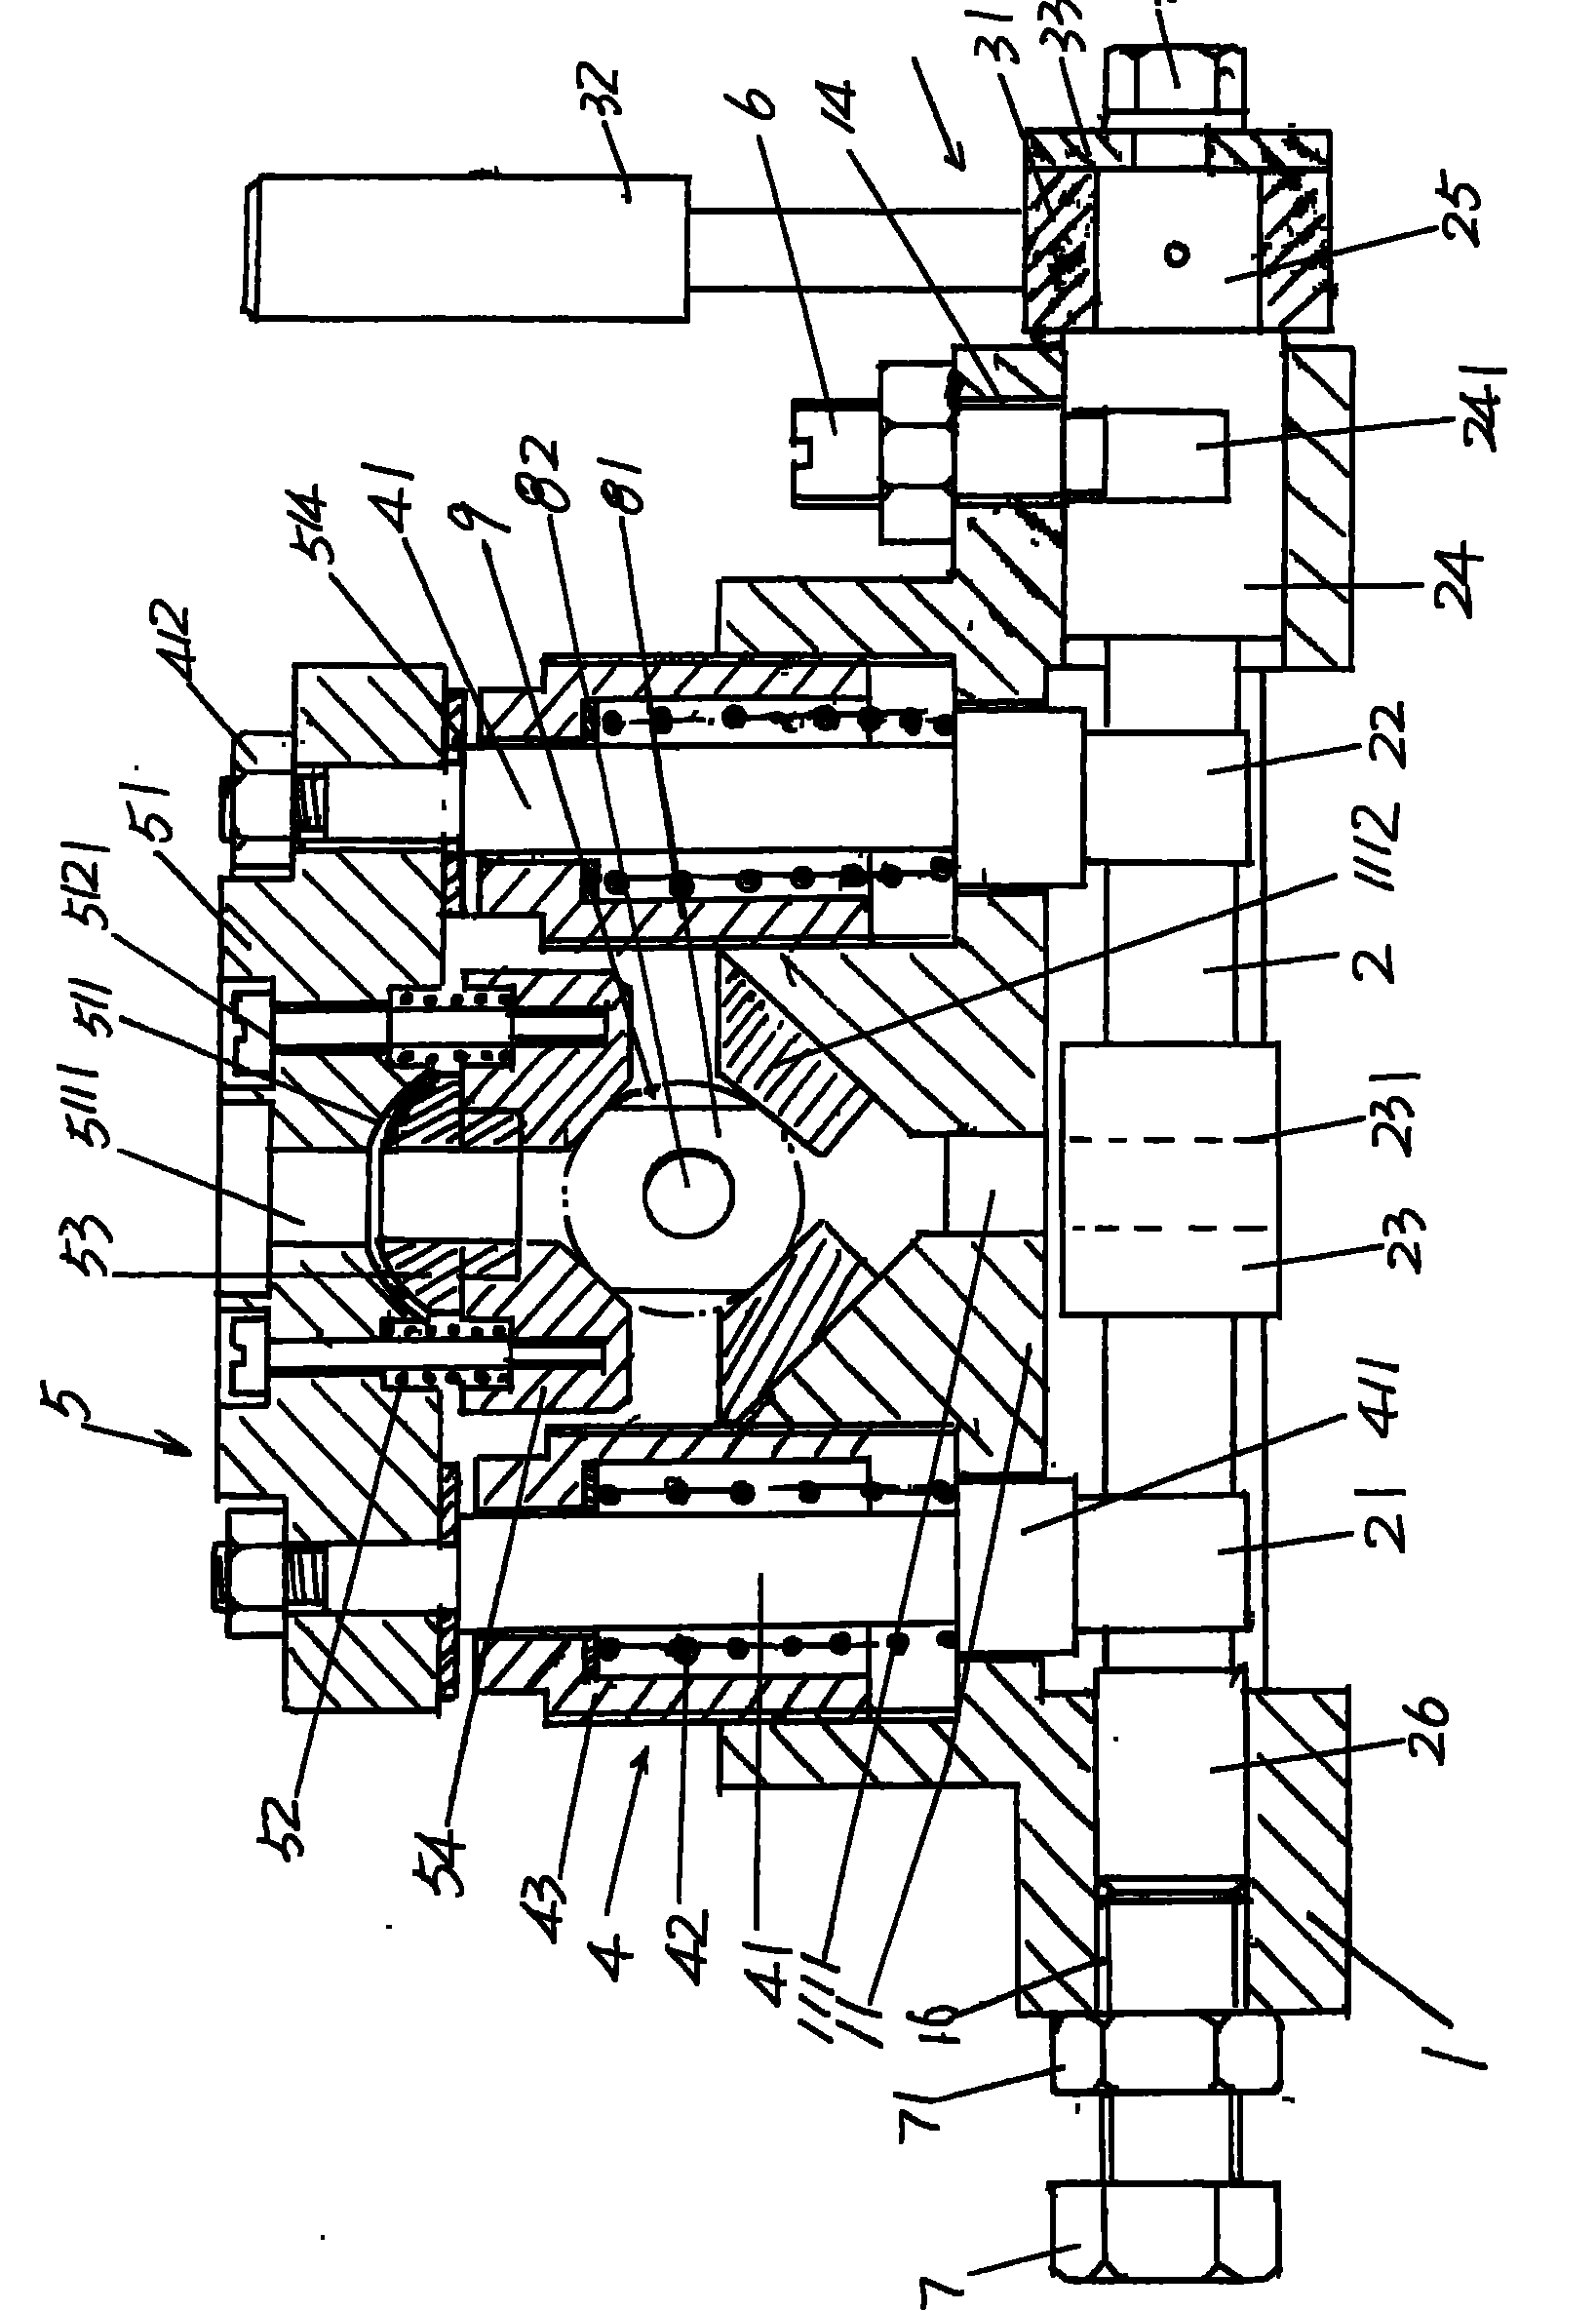 Clamp mechanism for processing piston pin hole of compressor